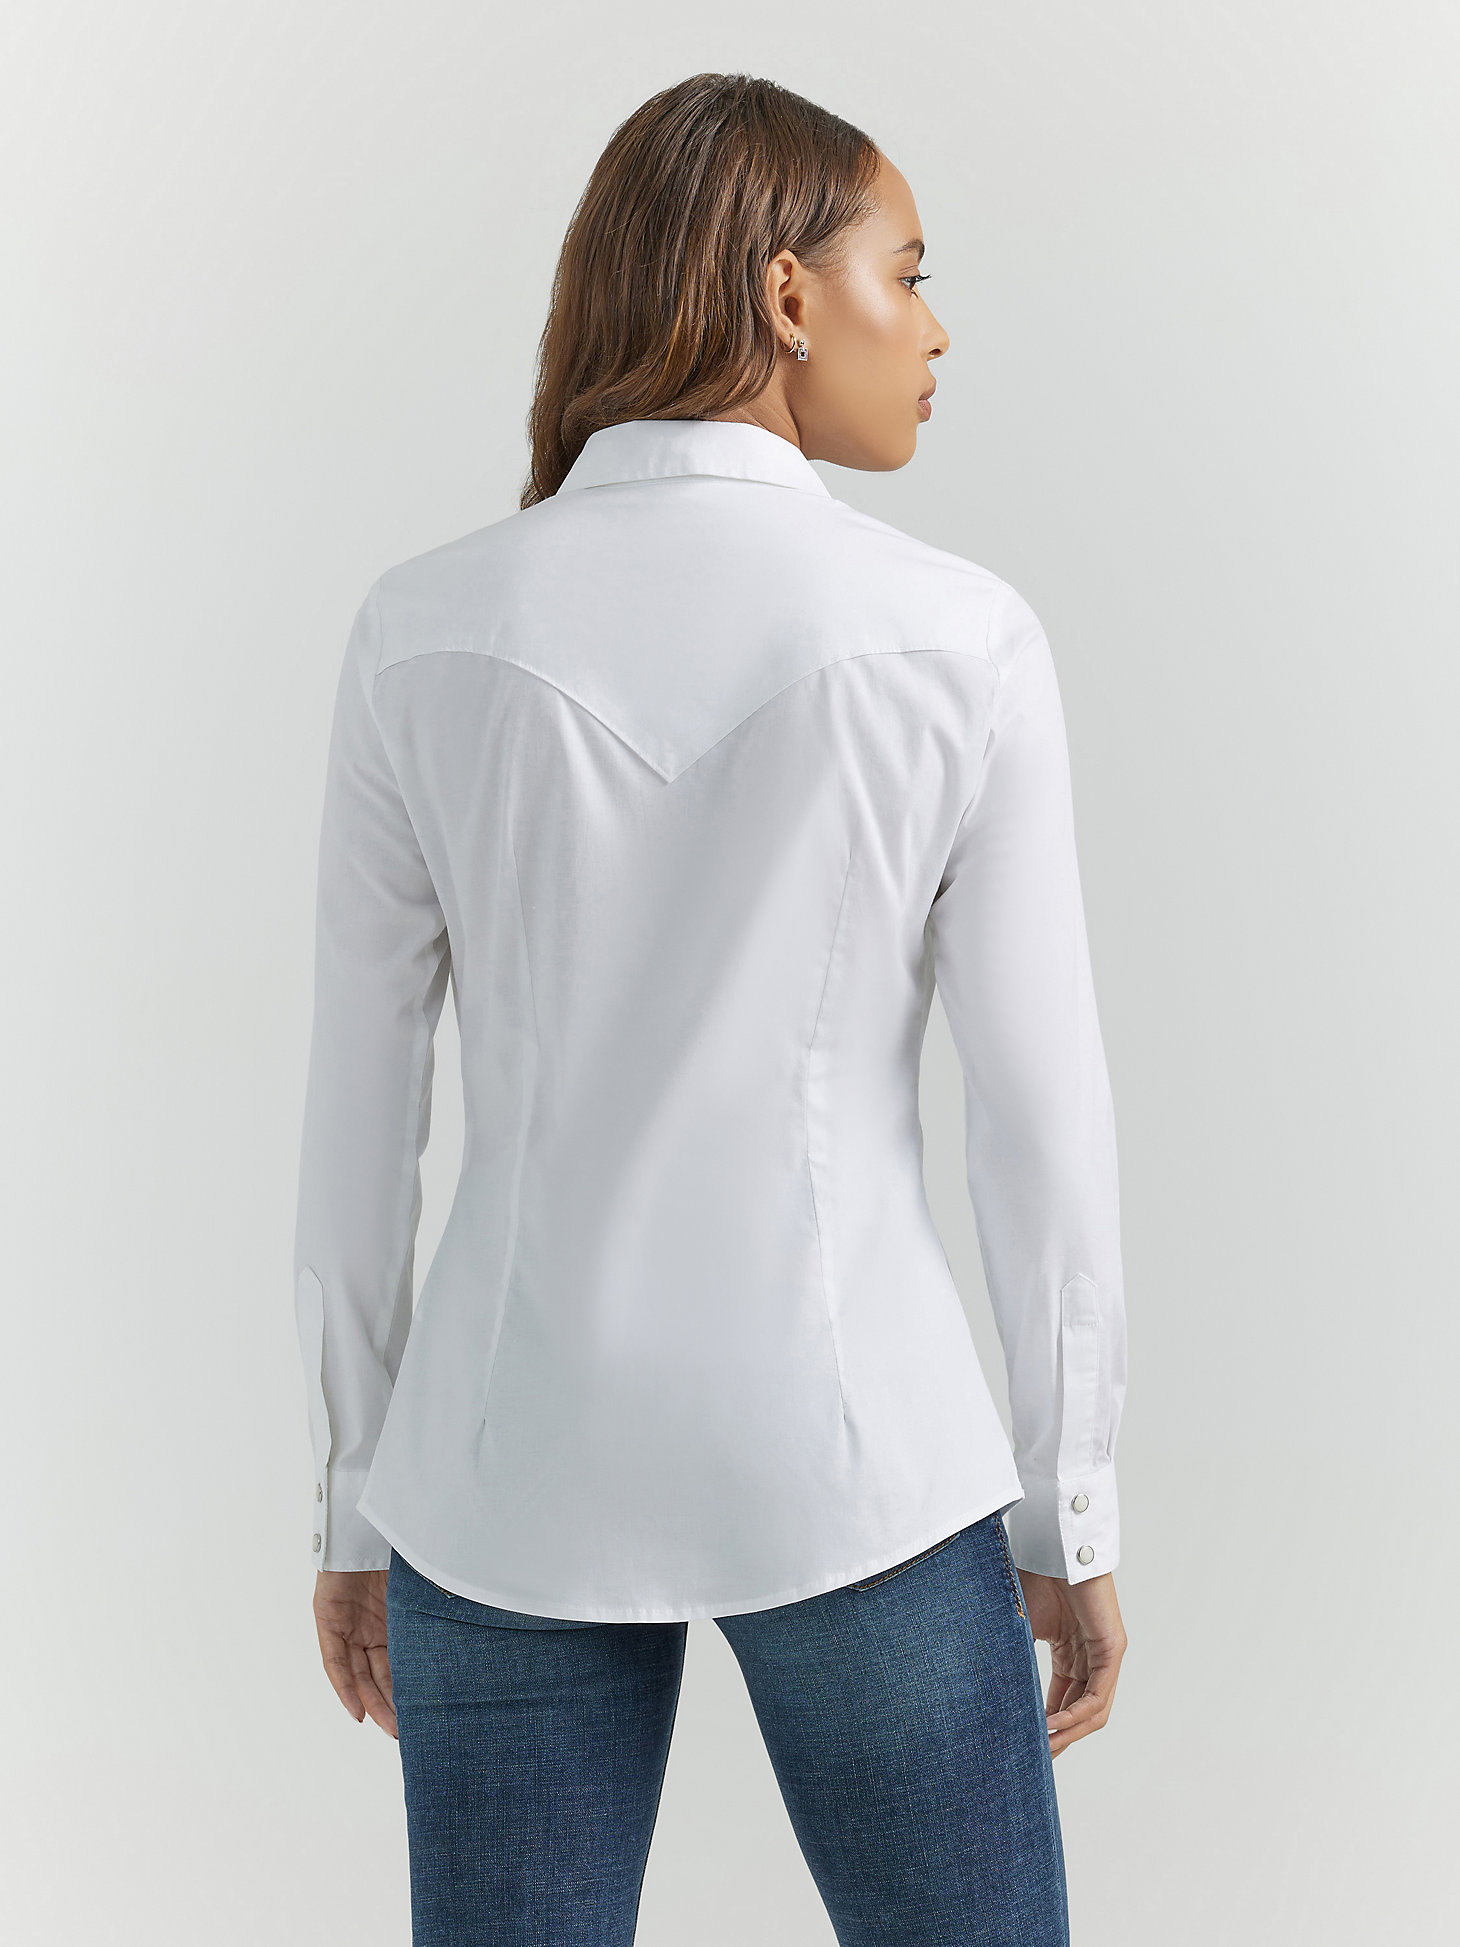 Wrangler® Long Sleeve One Point Front and Back Yokes Solid Top in White alternative view 3